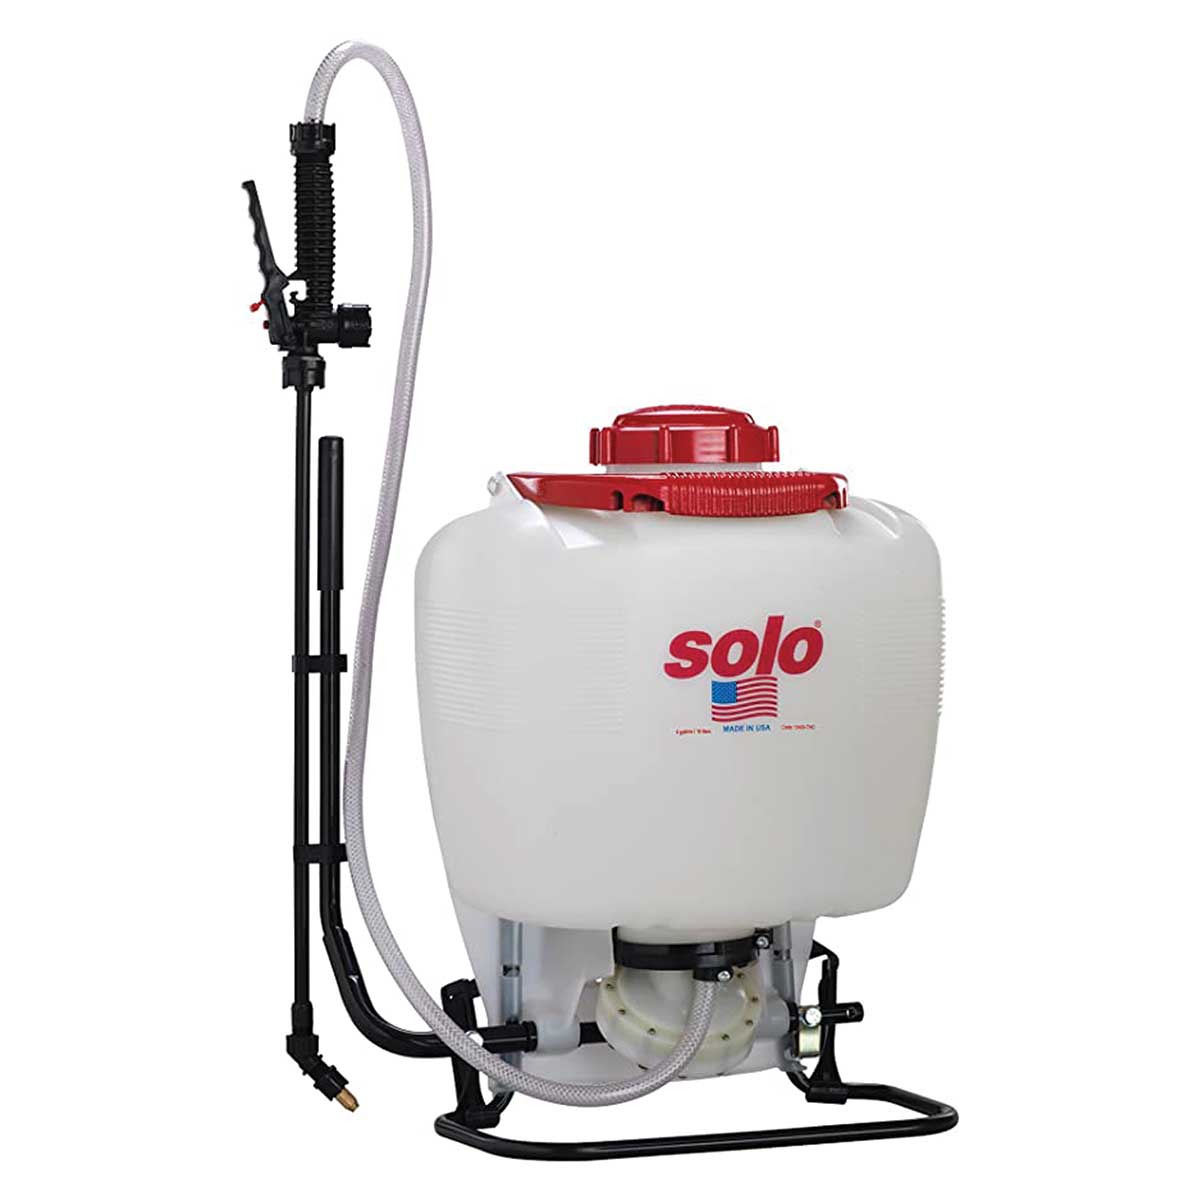 Solo 4-gal. Bleach-Resistant Deluxe Backpack Sprayer with Diaphragm Pump